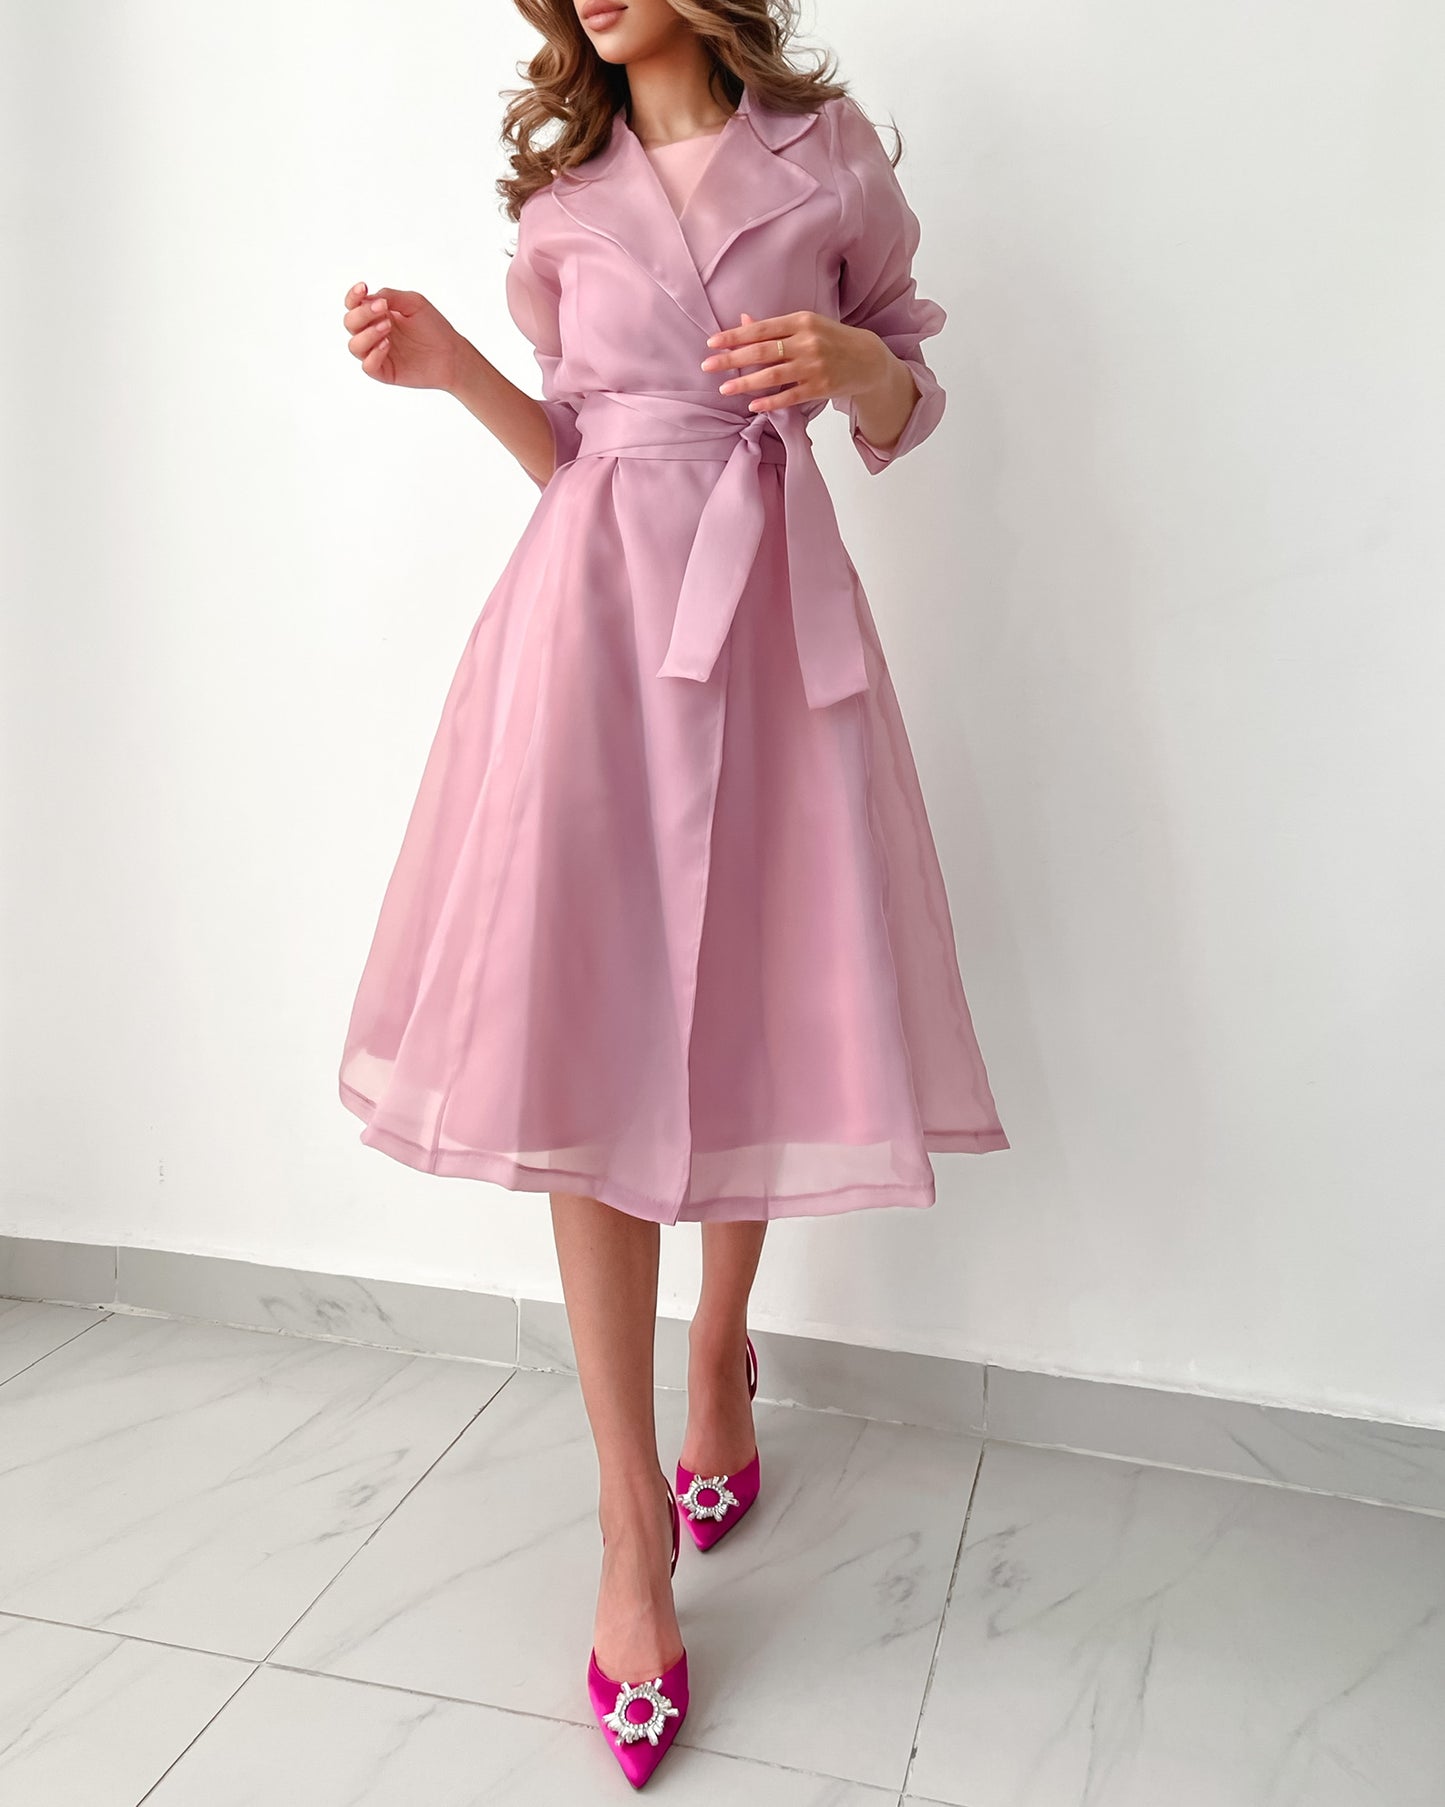 Satin dress toped with organza belted jacket in blush pink